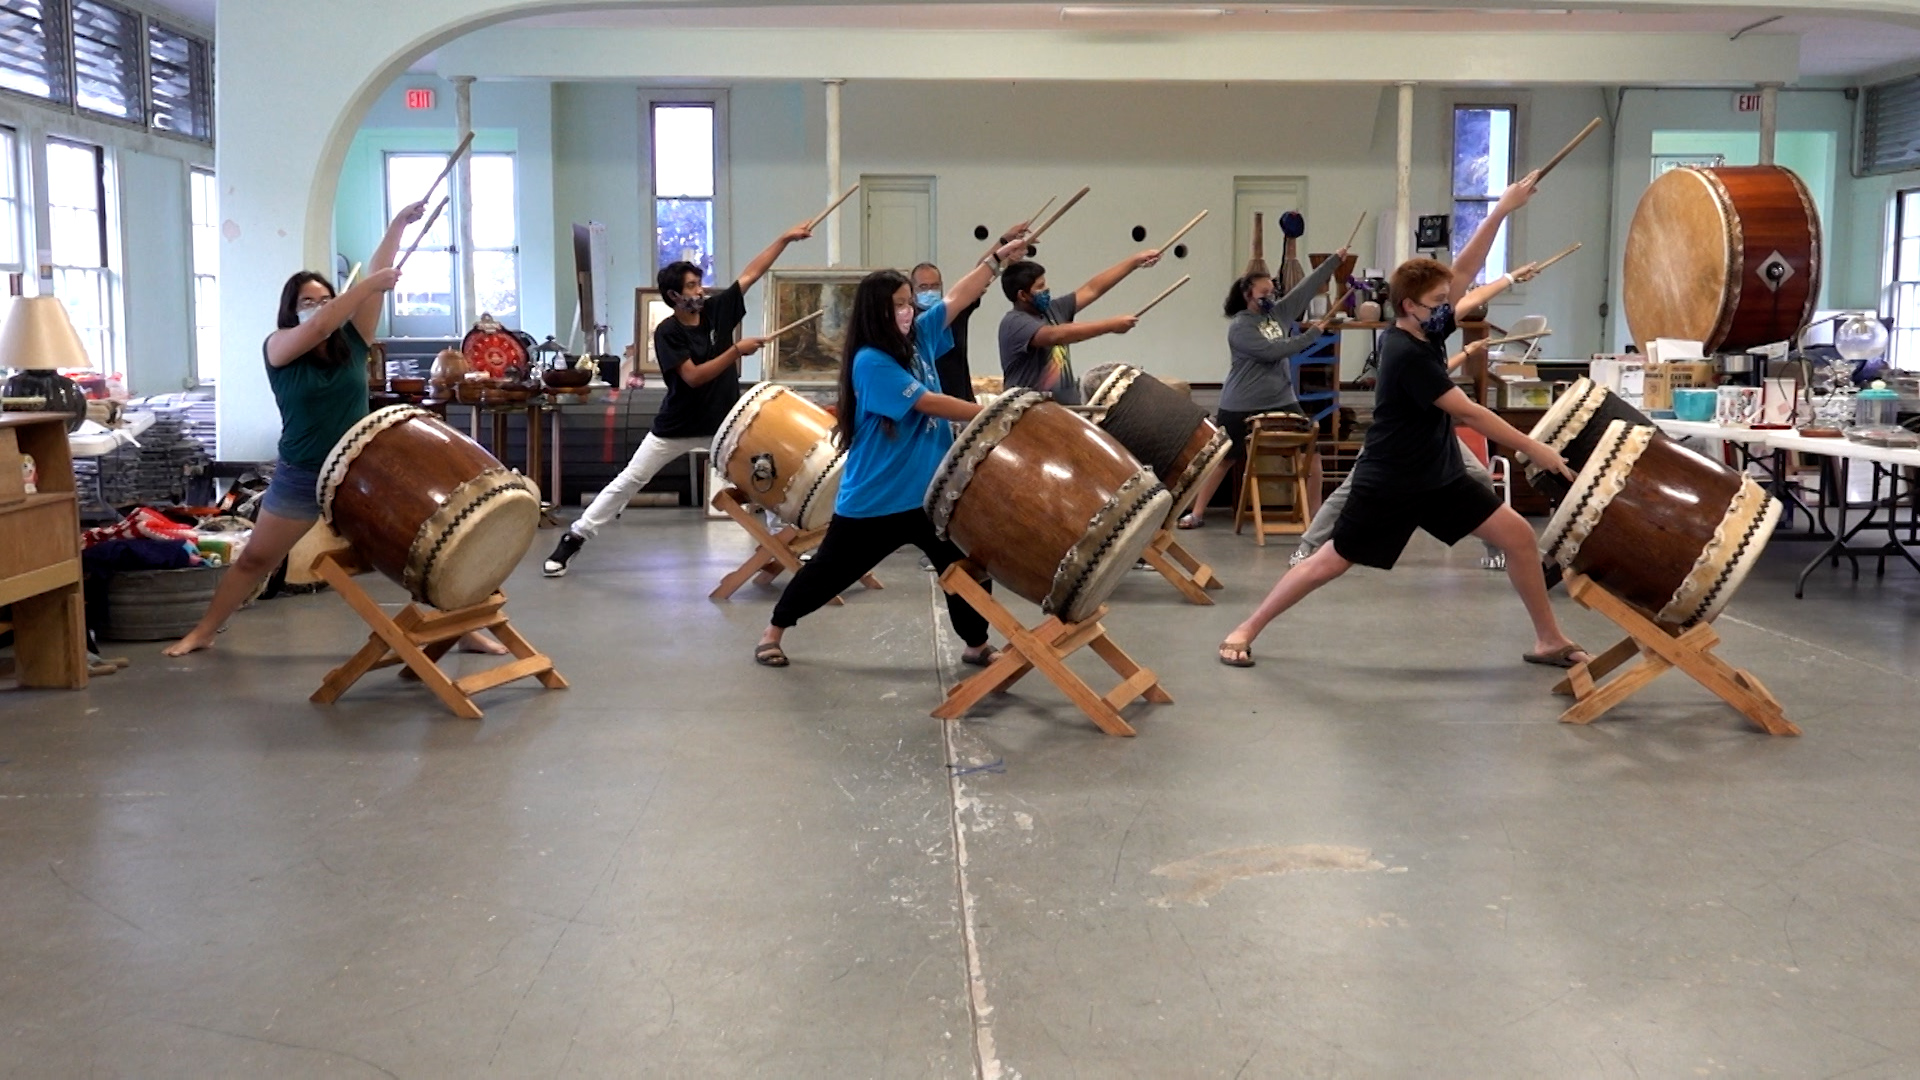 From Drumming to Humor, Students Find Ways to Cope During COVID-19